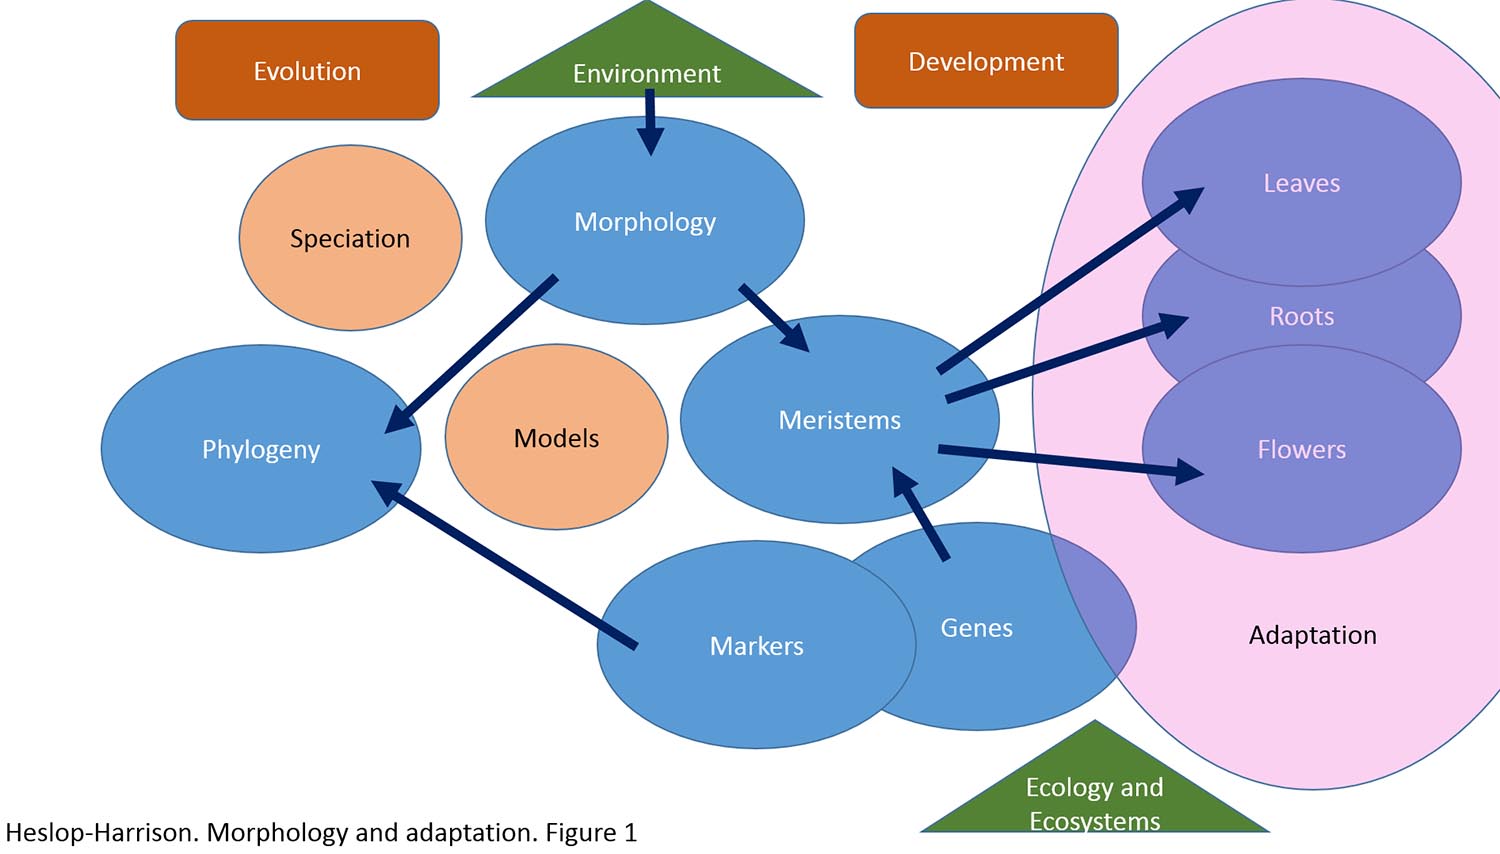 Plant adaptation arises from their morphology, itself a product of evolution and development. In this figure, the aspects and interactions of research at different levels are shown, with the work having implications across botany, including understanding plant phylogeny and speciation, and for ecology and ecosystems.